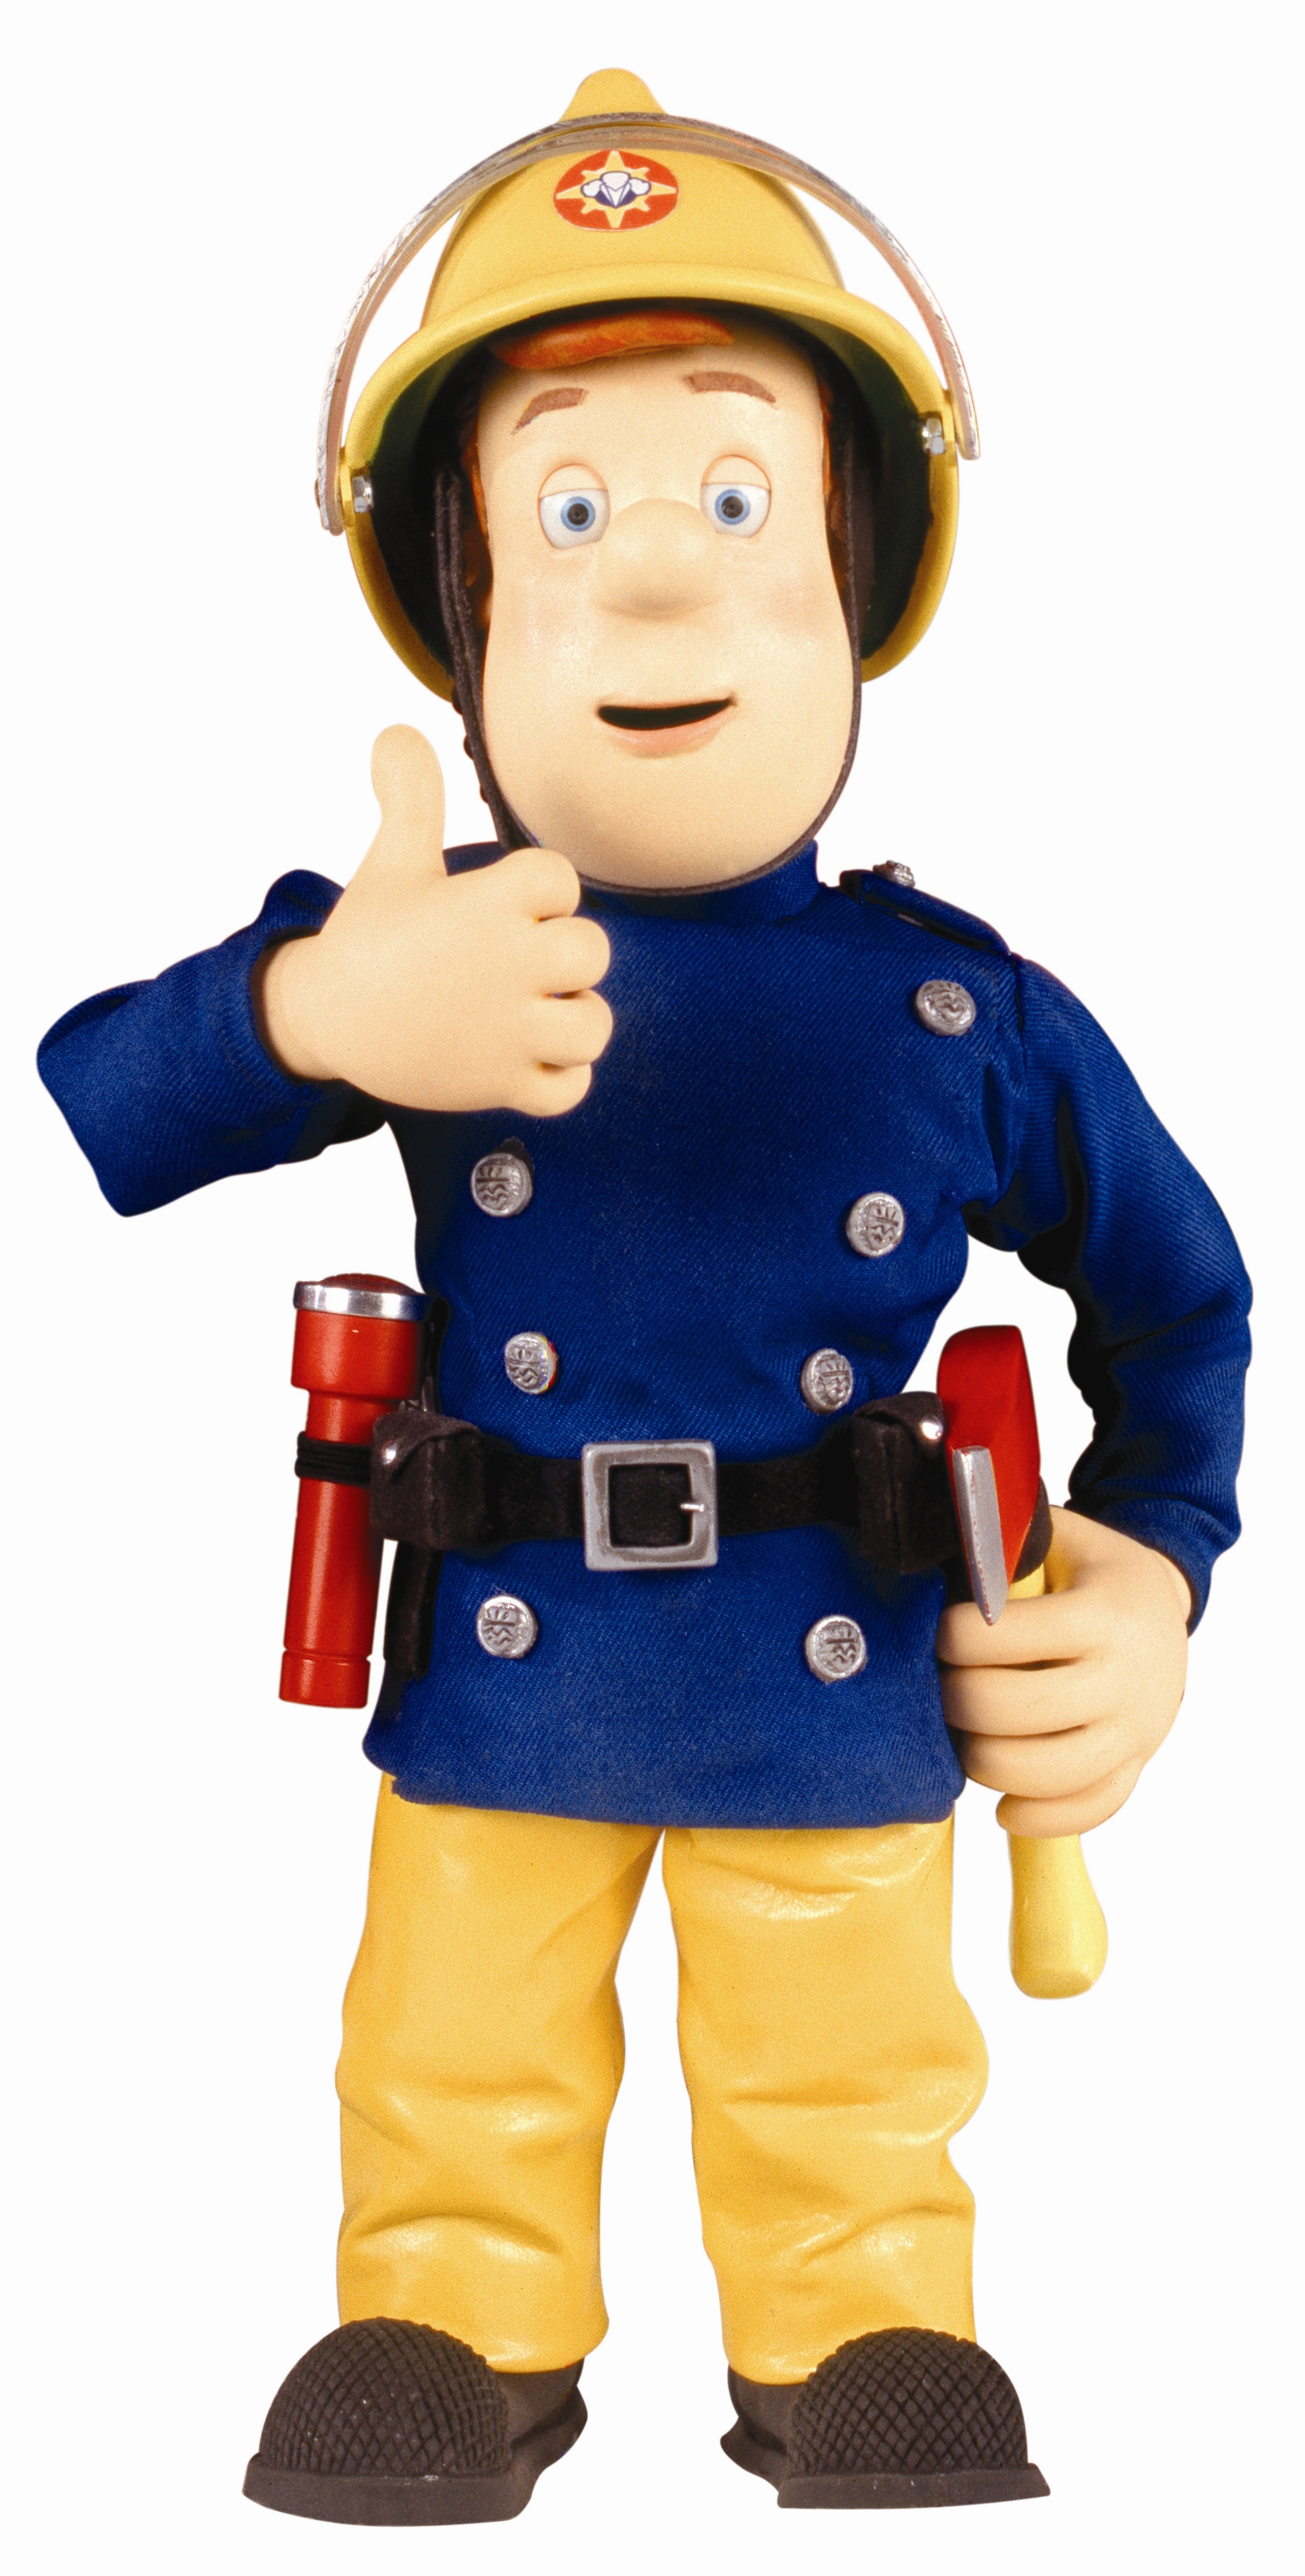 Fireman cute firefighter clipart free images